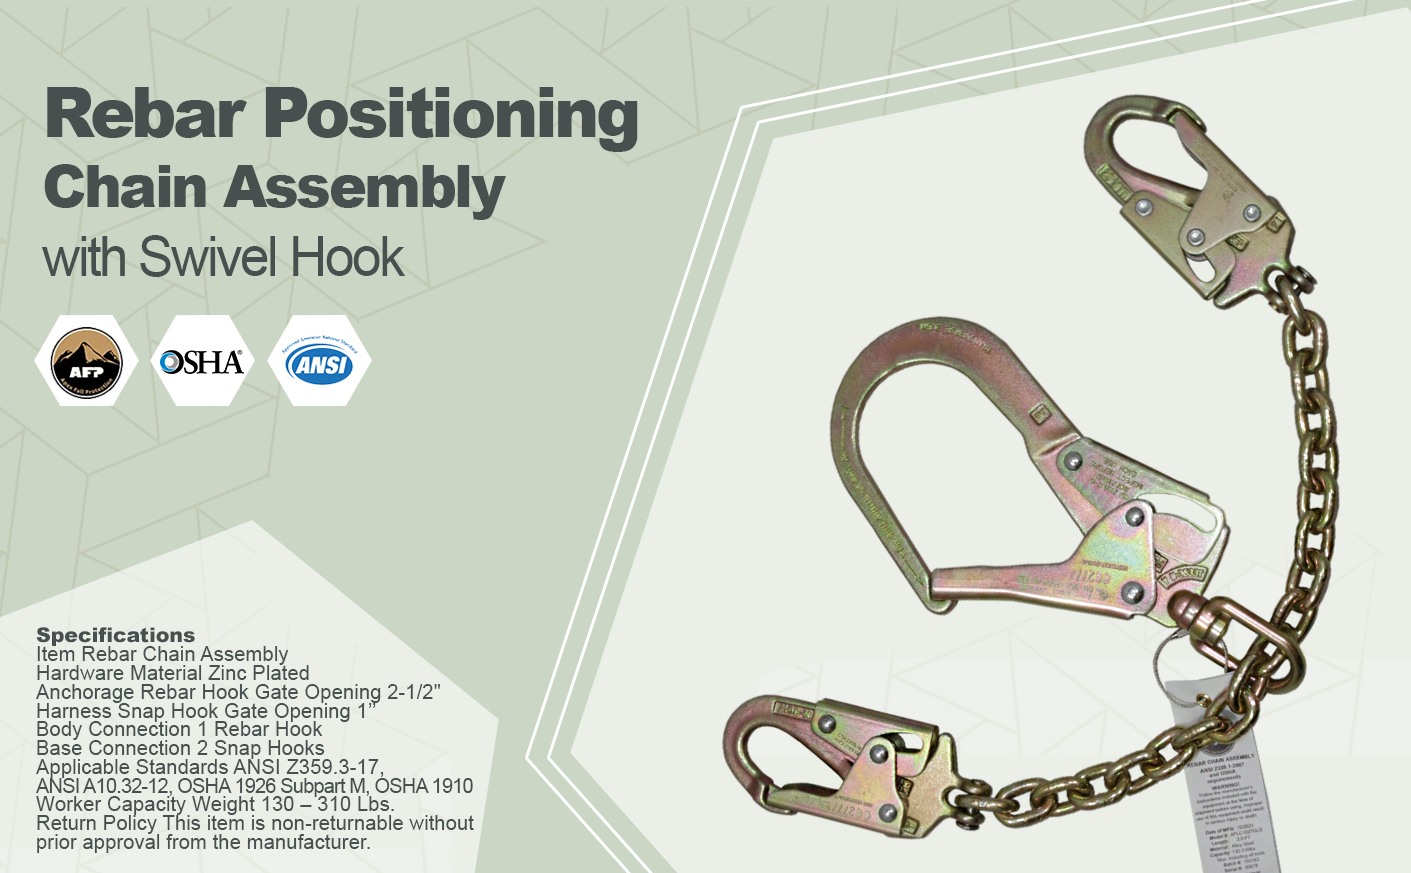 AFP Heavy-Duty 26’’ Gold Zinc Plated Rebar Positioning Chain Assembly with Swivel & Steel Snap Hooks, Safety Fall Protection Positioning Restraint (OSHA/ANSI) PPE